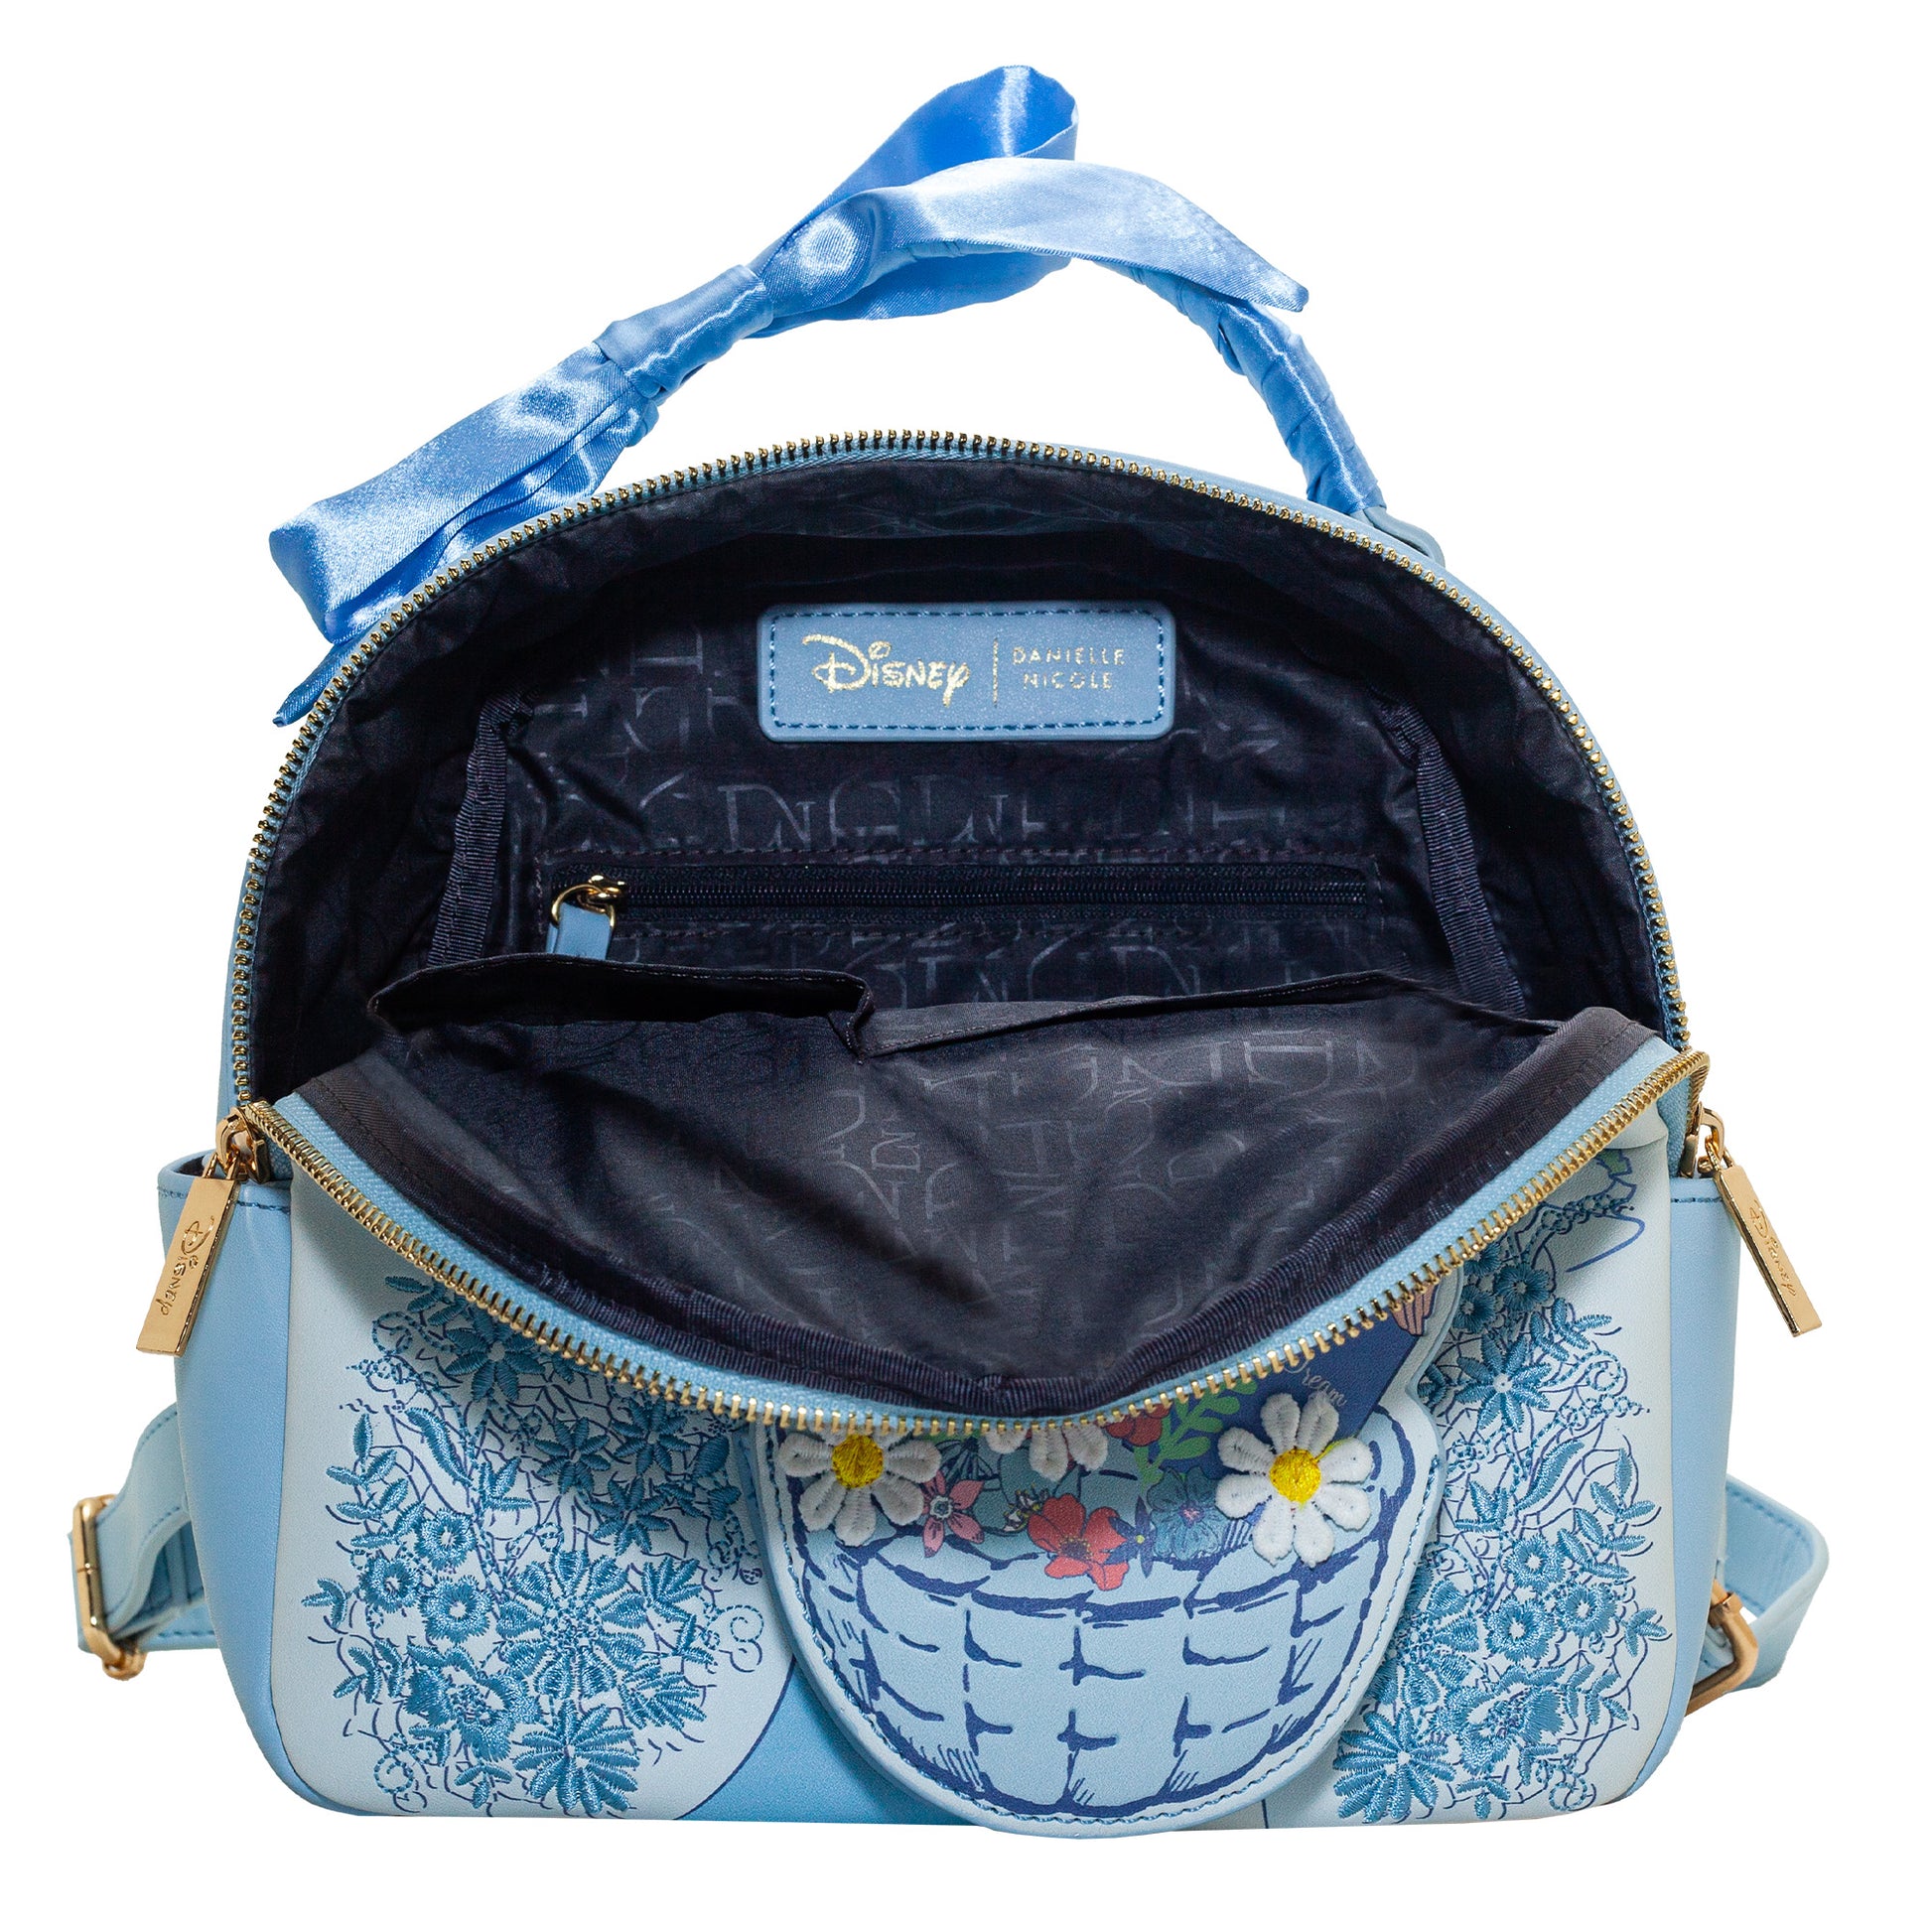 Beauty and the Beast Belle Anniversary Backpack